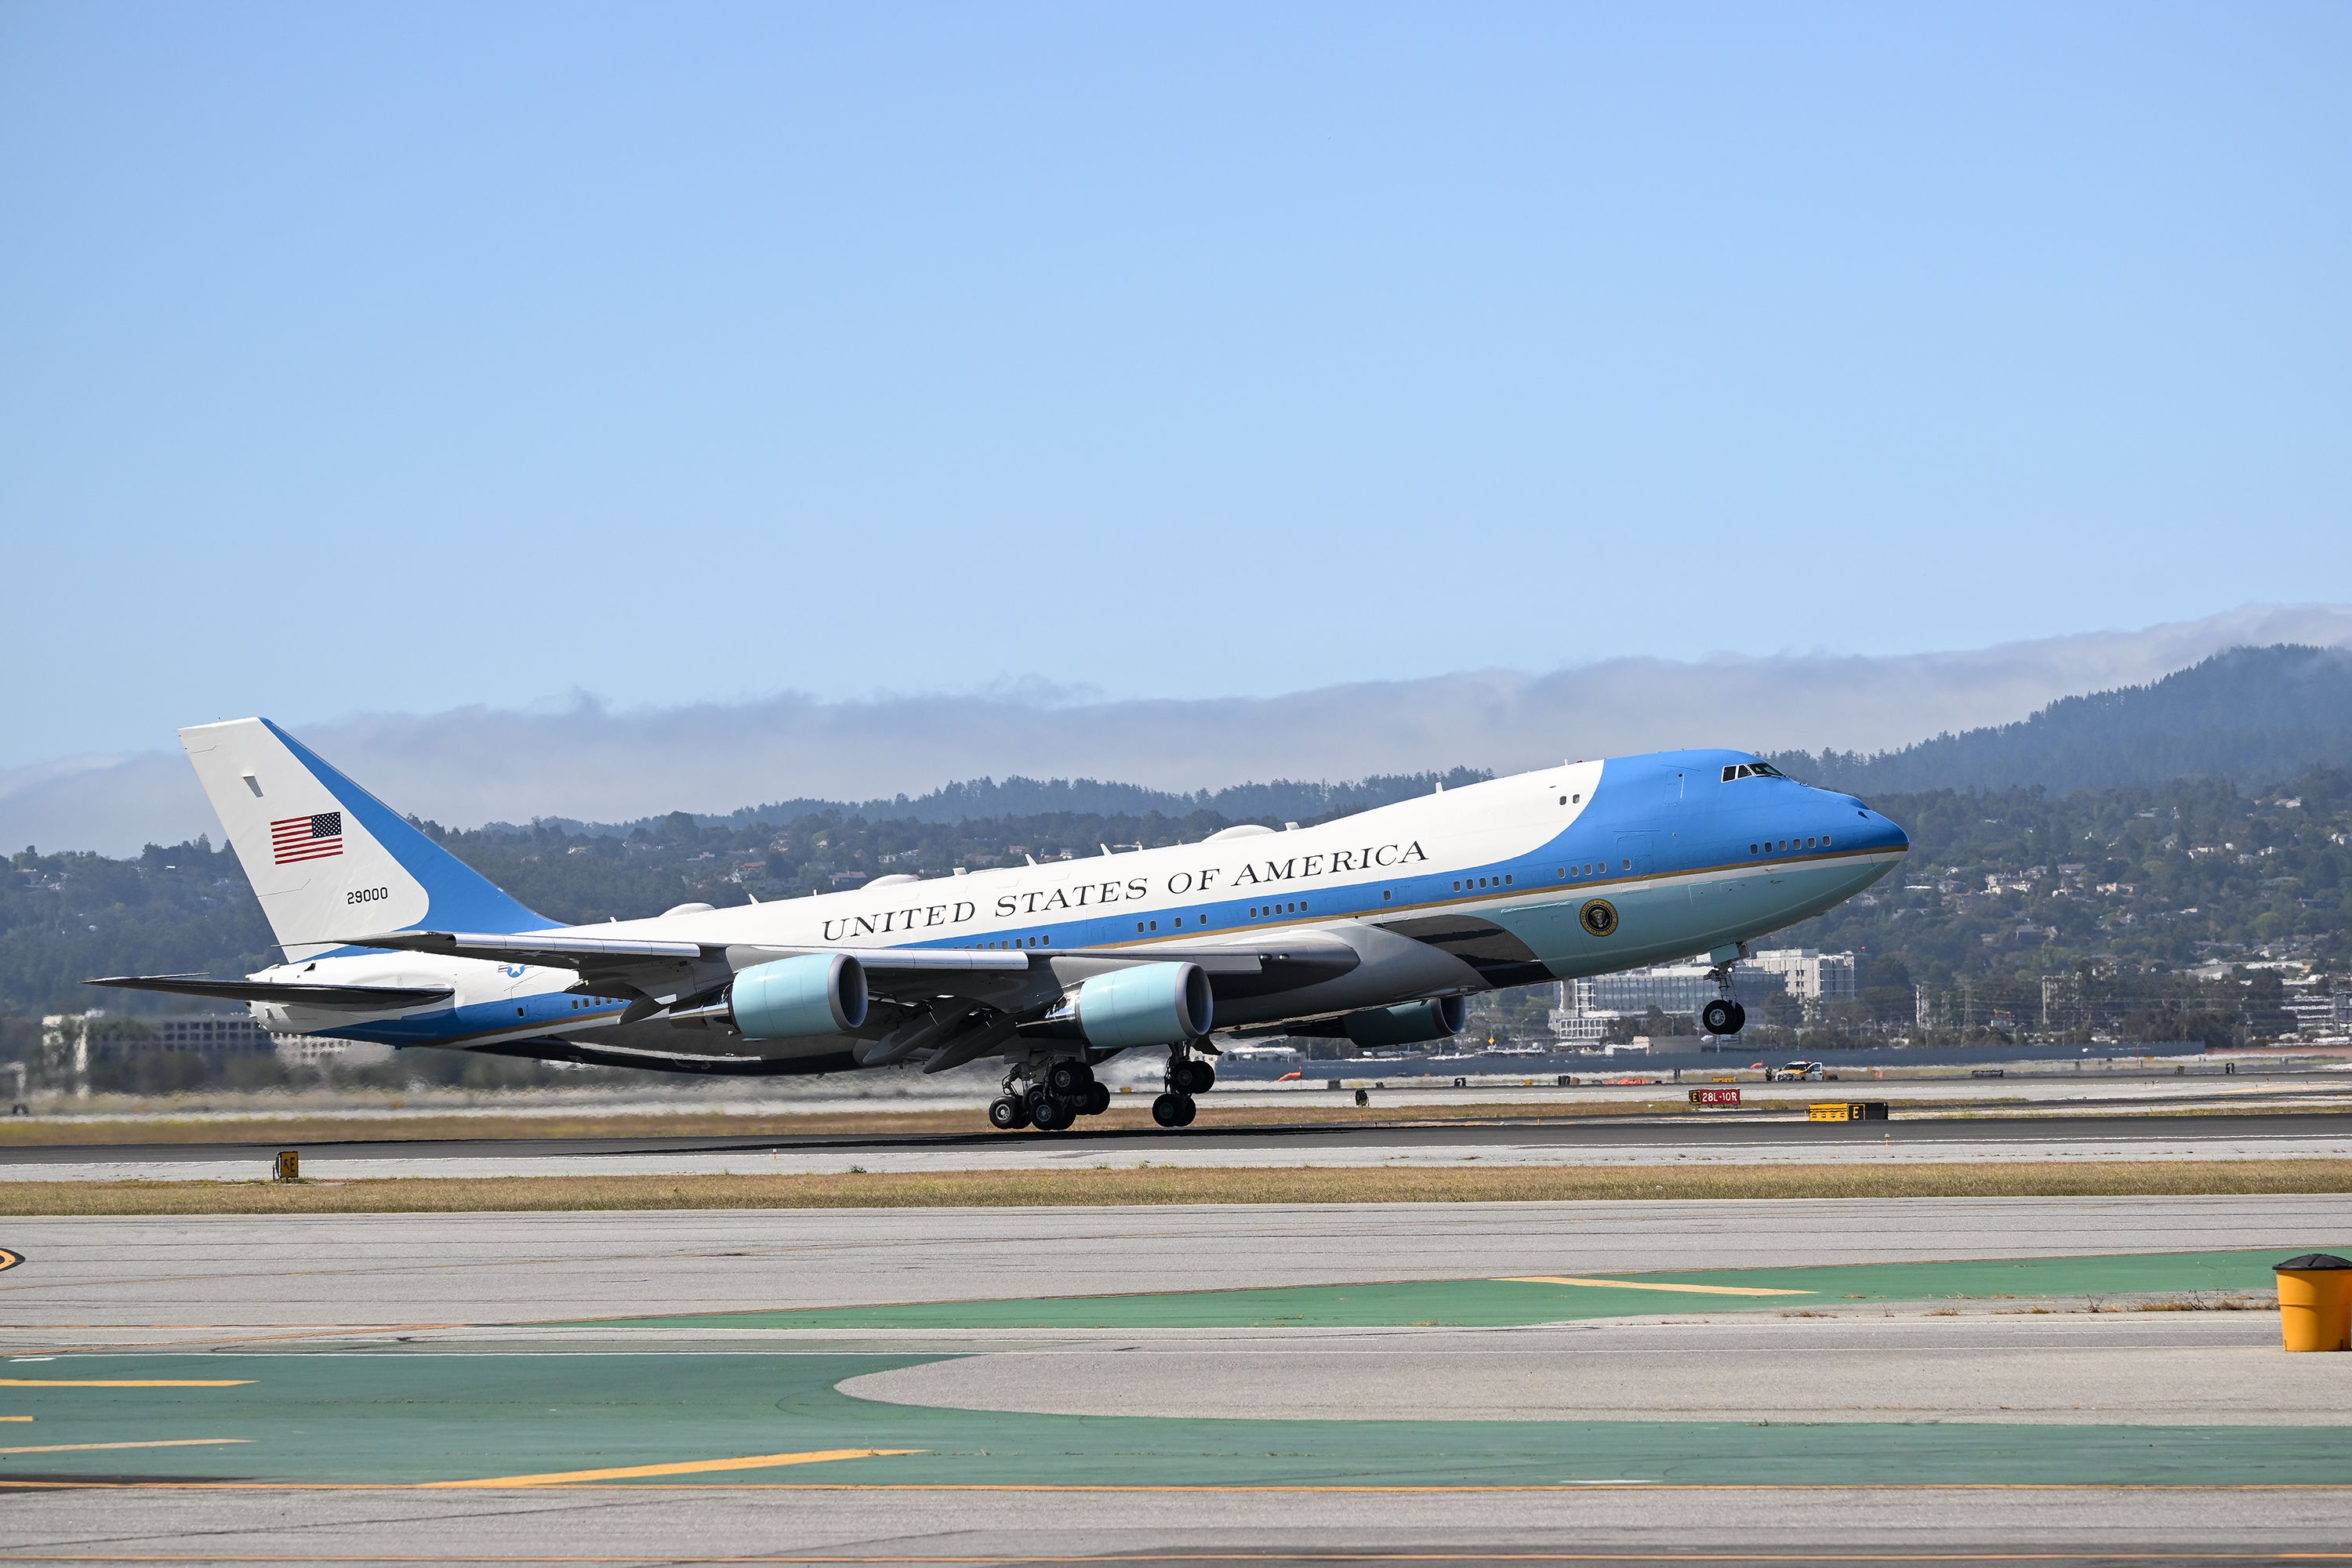 20 facts you might not know about 'Air Force One